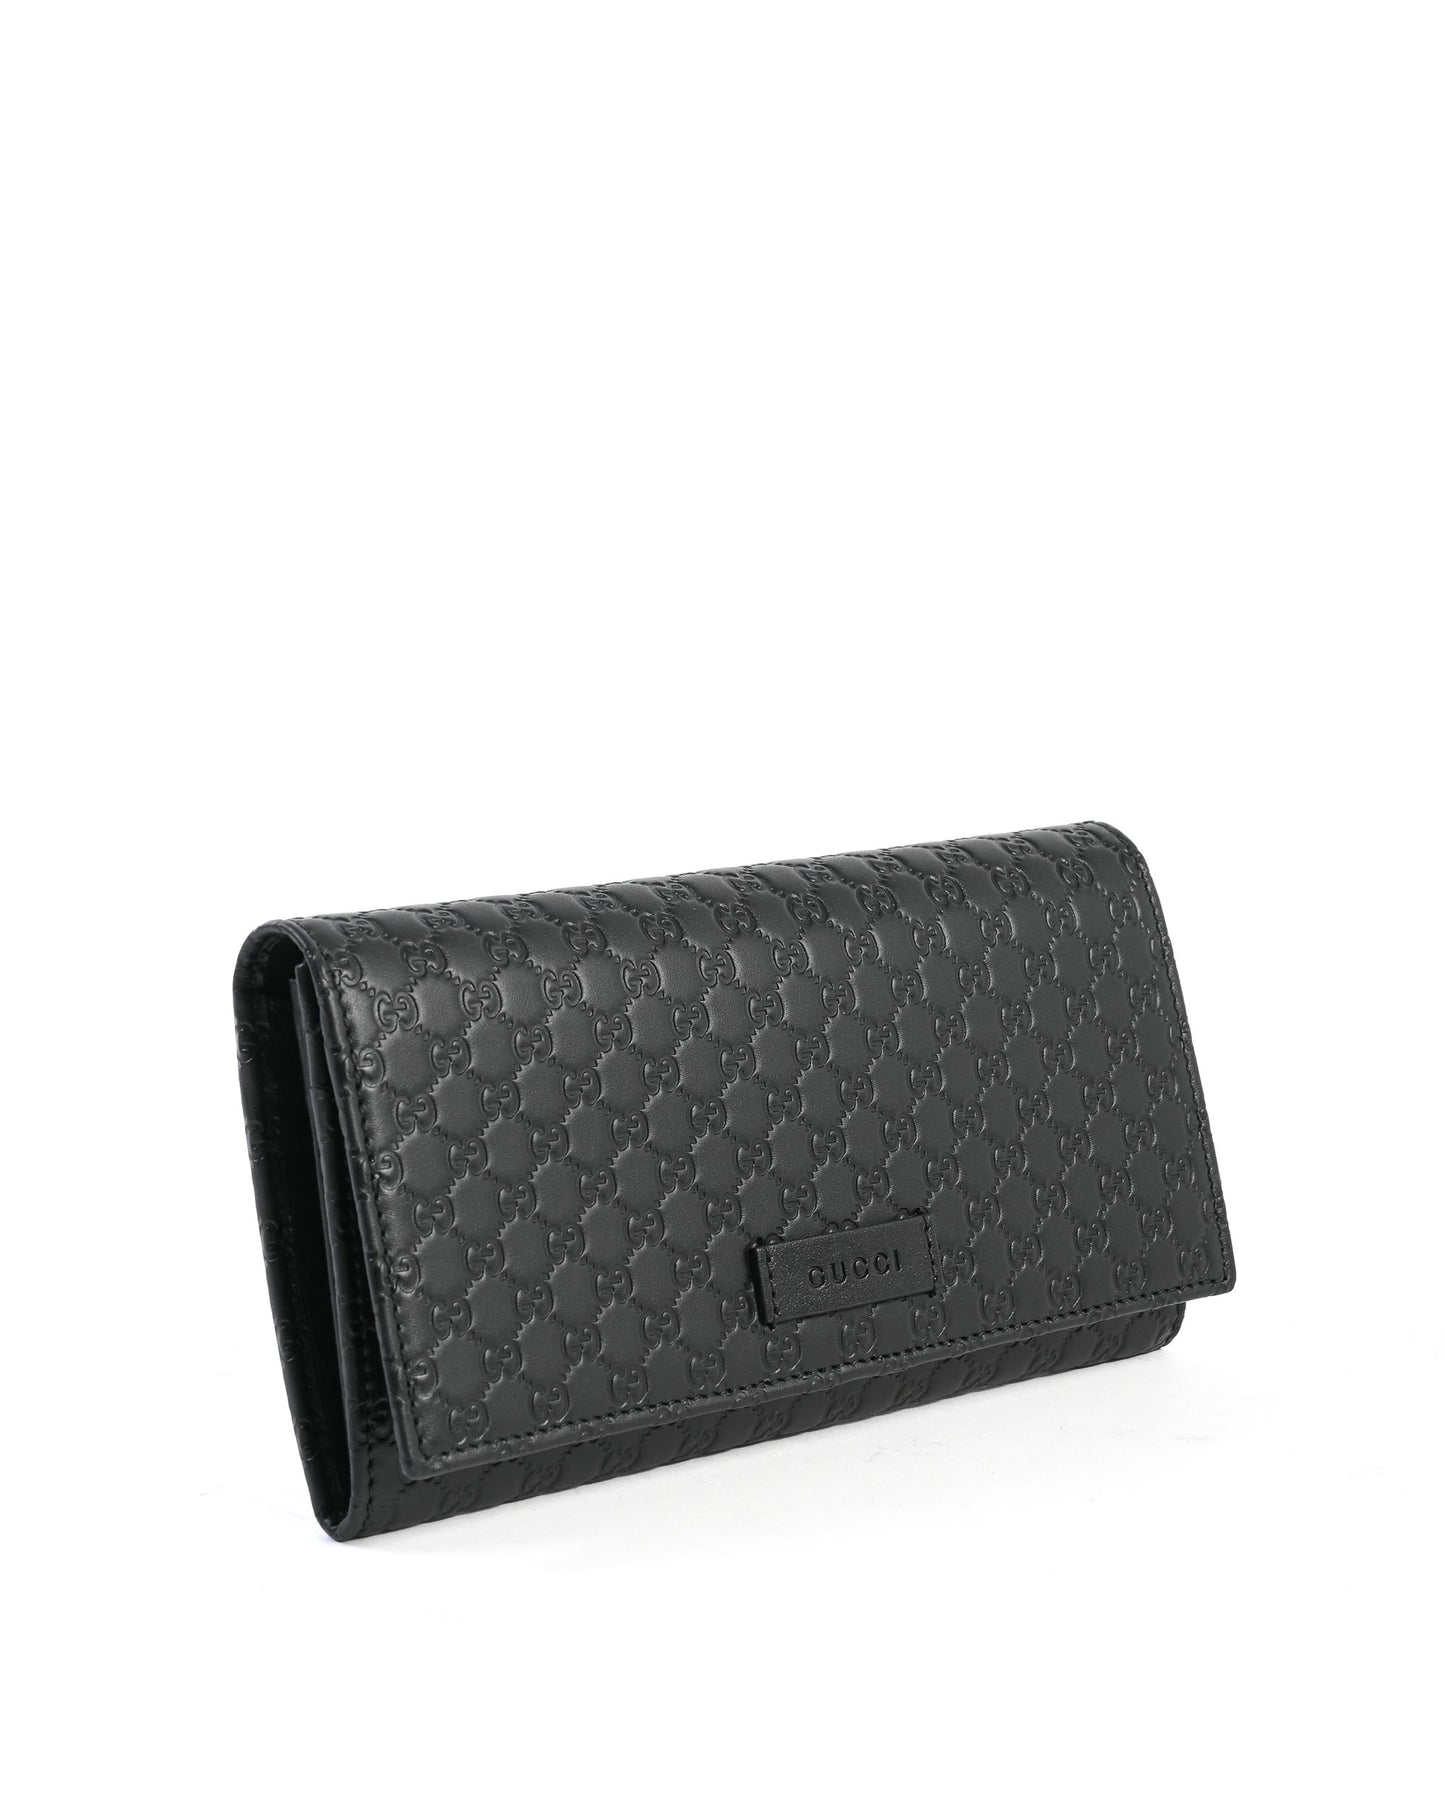 Gucci Guccissima leather wallet 449396 BMJ1G 1000